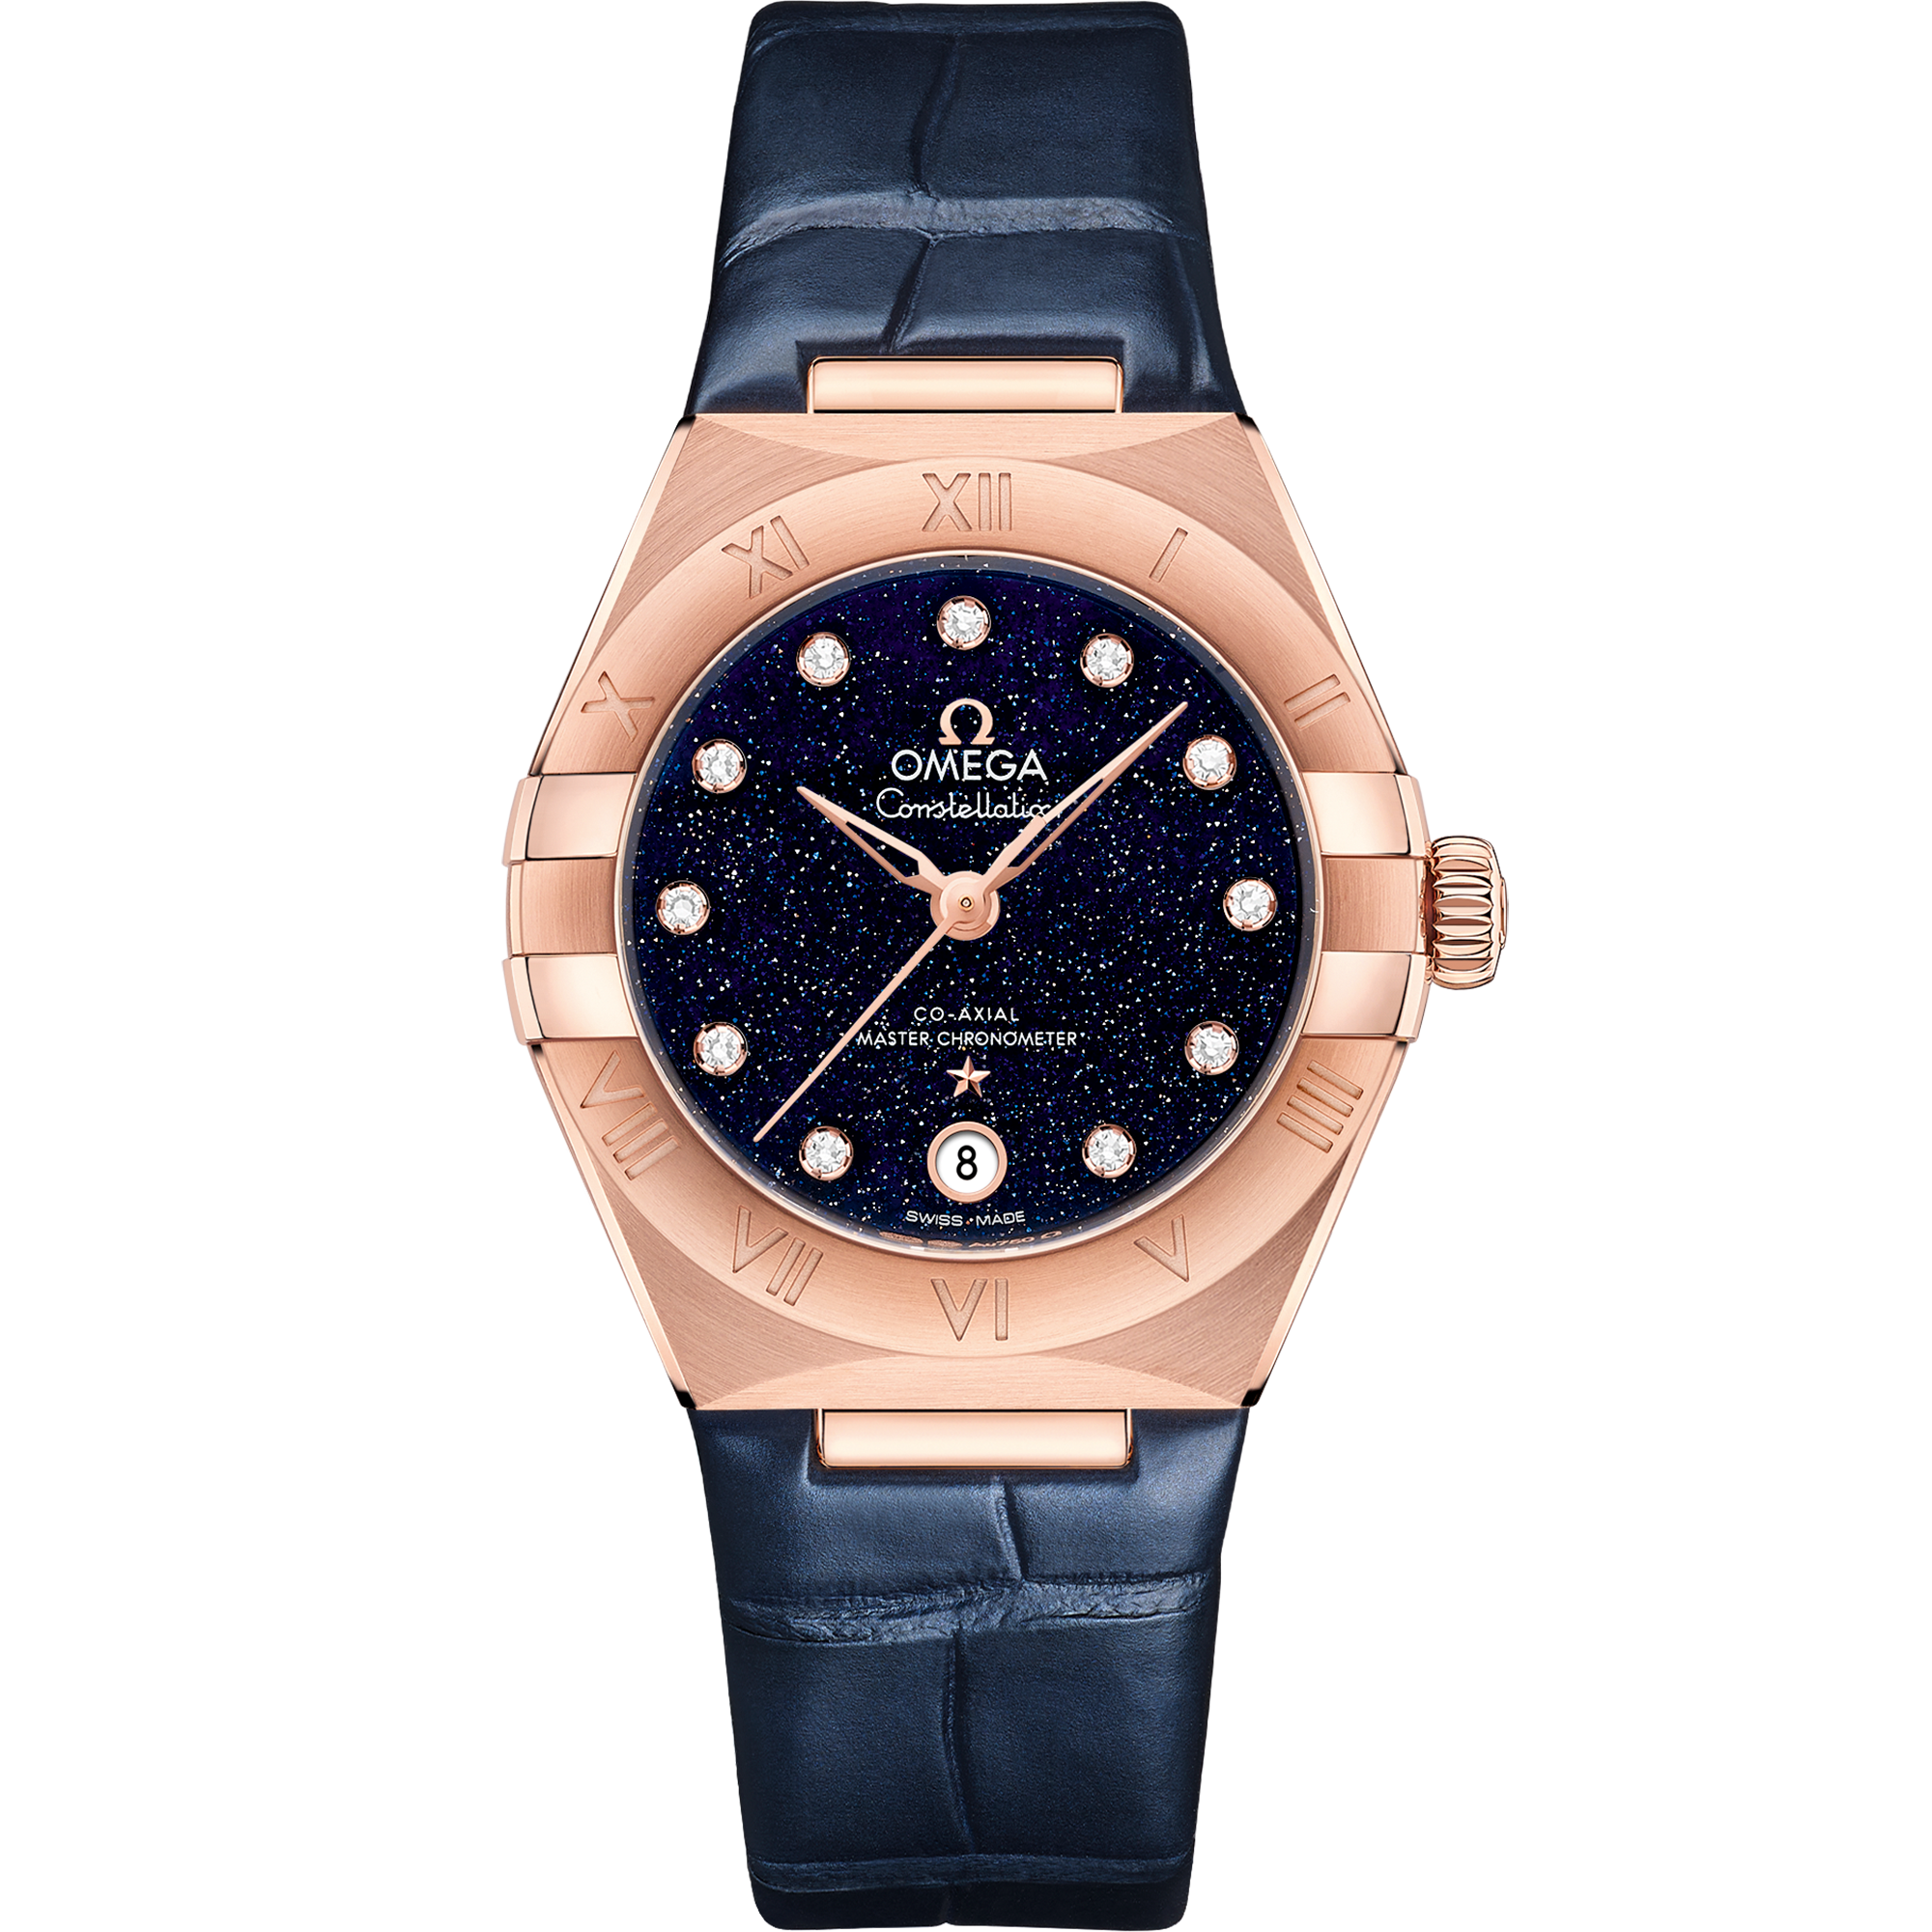 Blue dial watch on Sedna™ gold case with Leather strap - Constellation 29 mm, Sedna™ gold on leather strap - 131.53.29.20.53.003